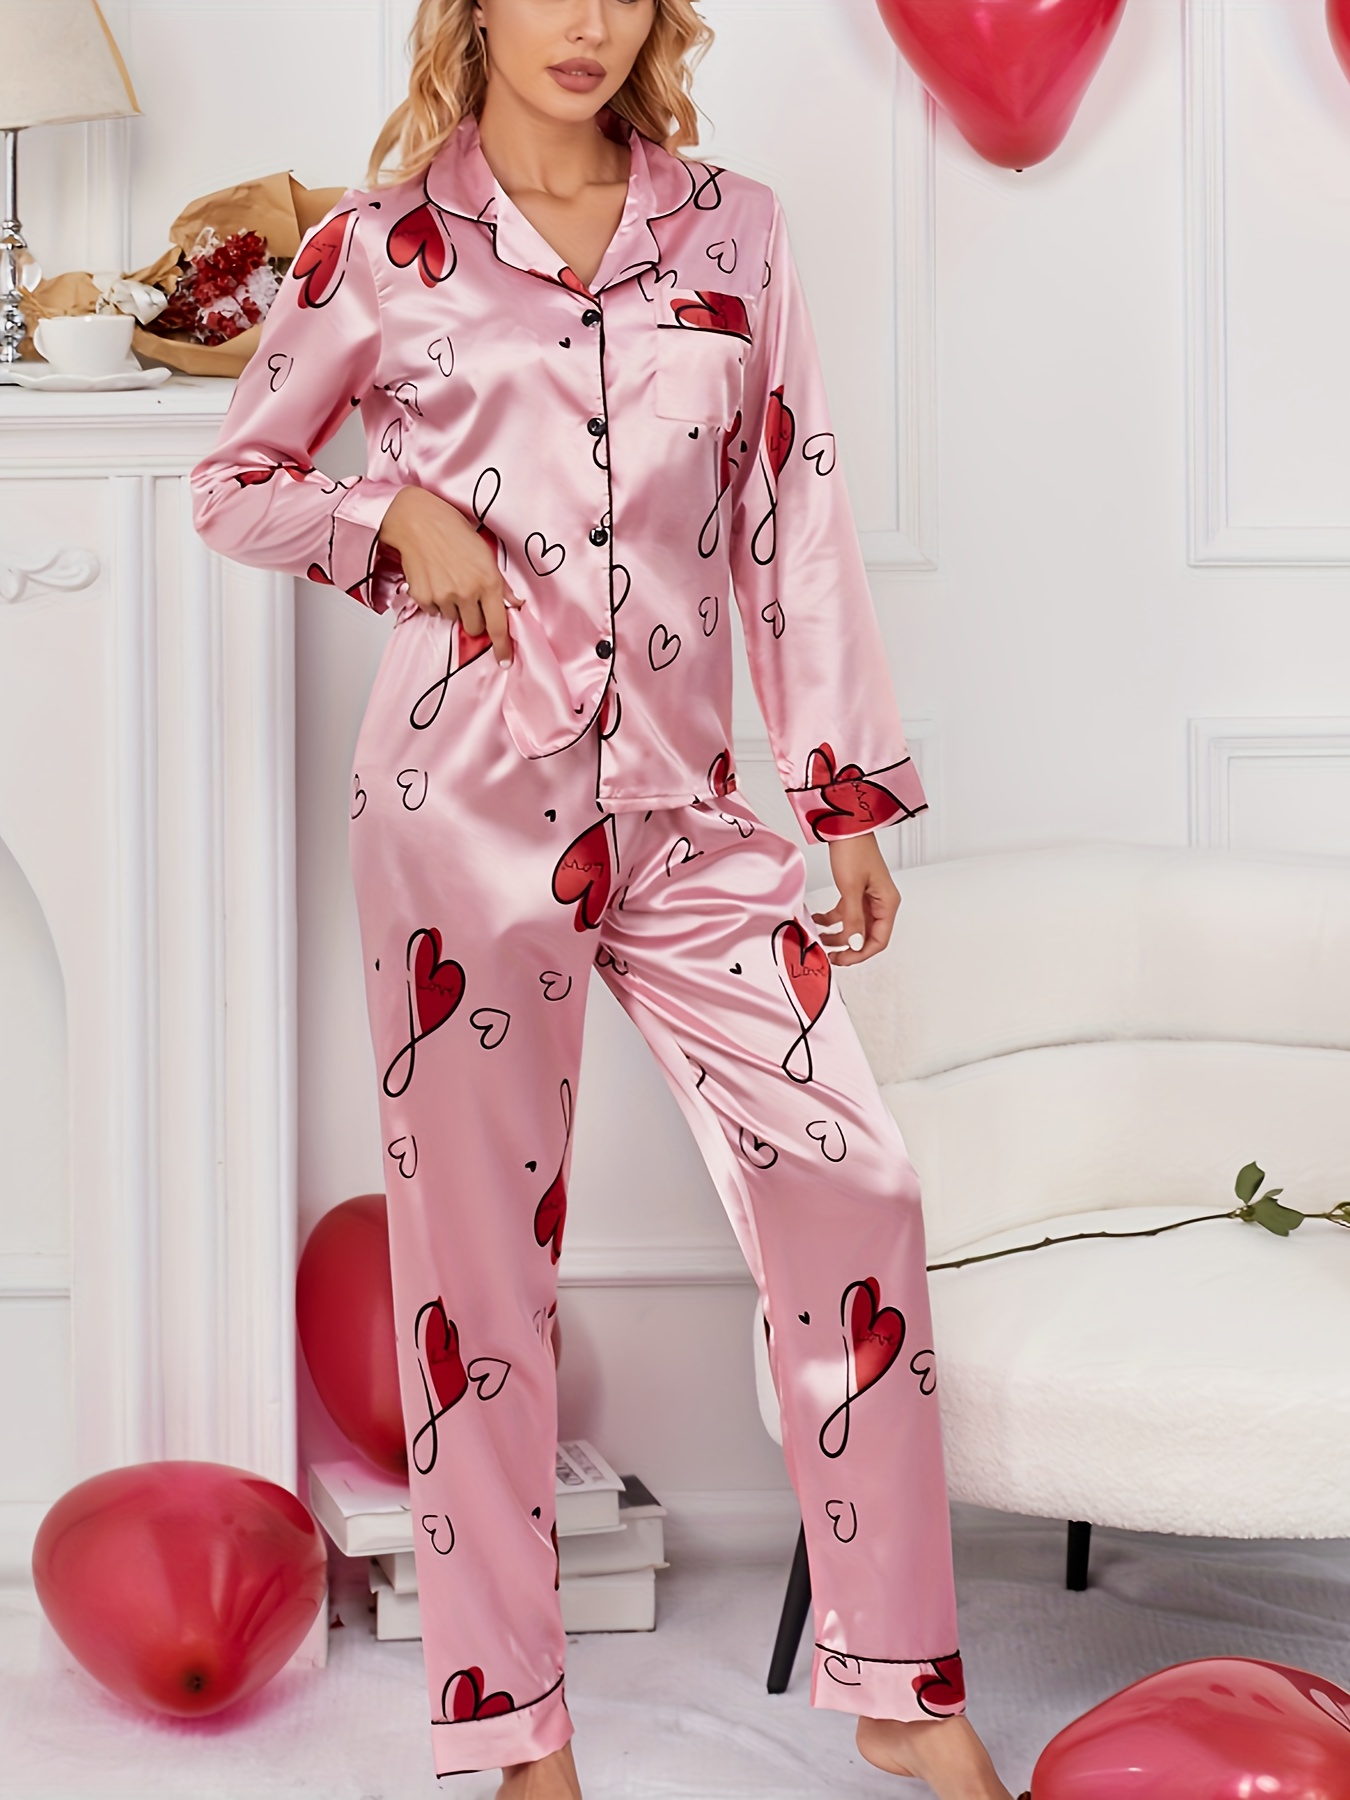 JDEFEG Support Nightgown Women Pajama Printing Sets Long Sleeve